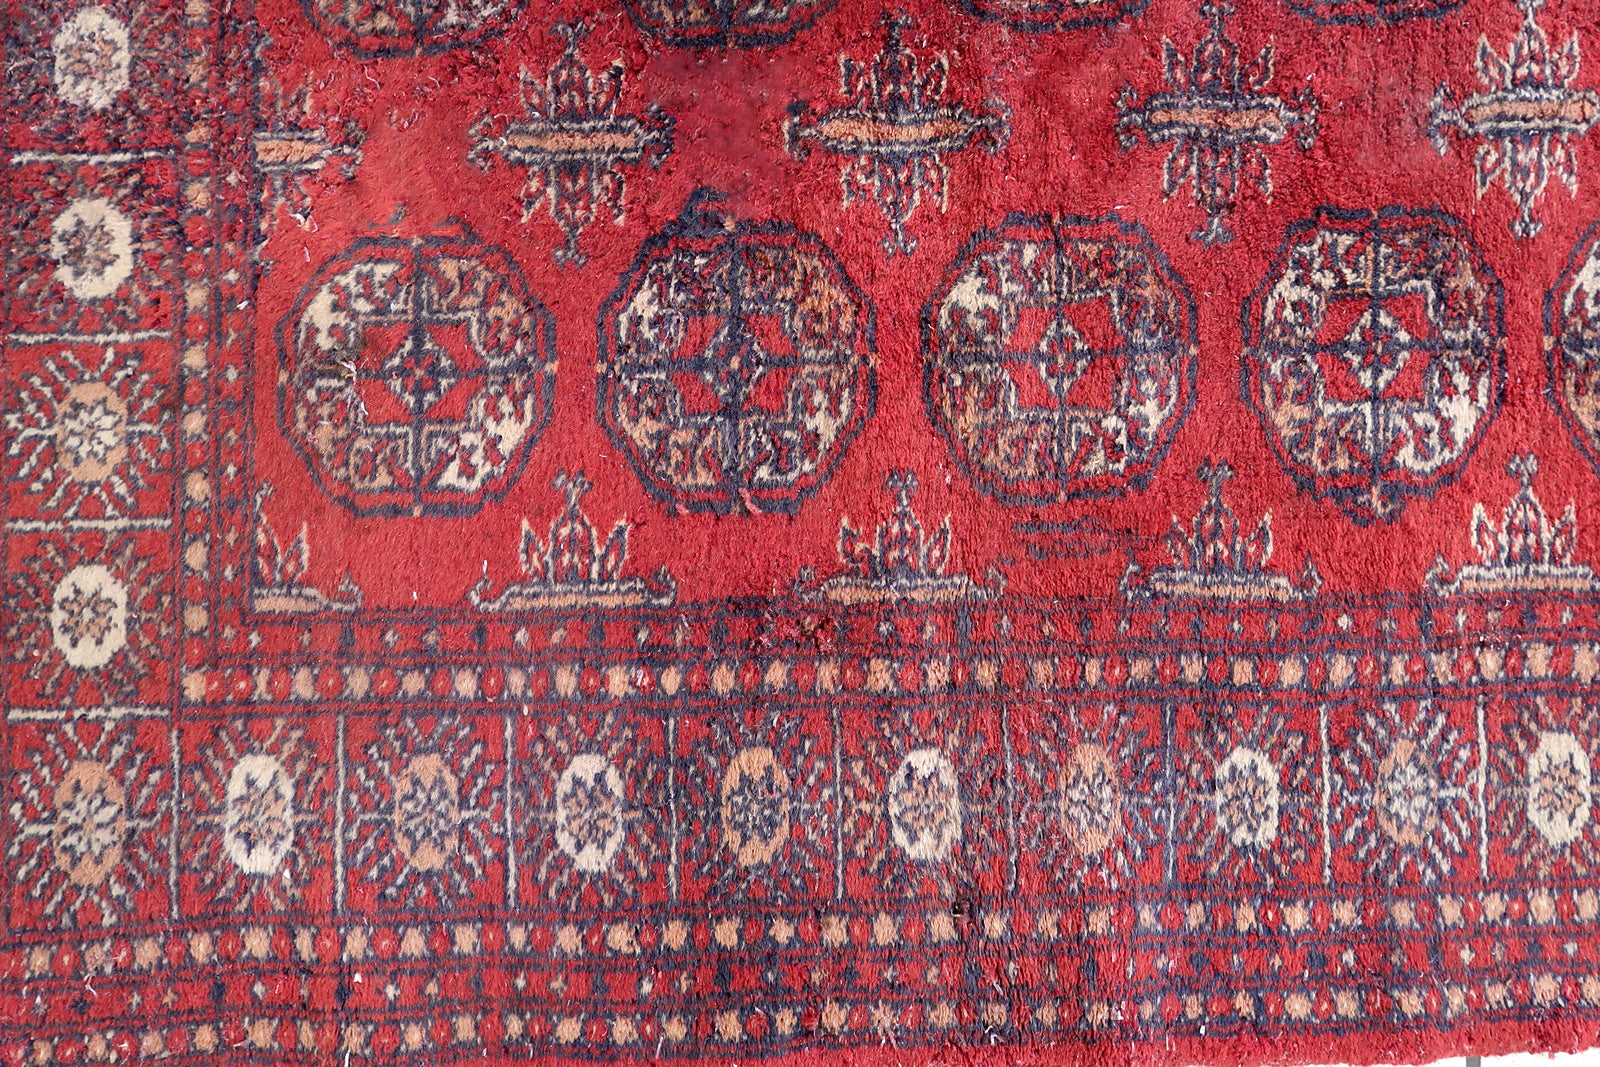 Handmade vintage Uzbek Bukhara rug in bright red color. The rug is from the end of 20th century in good condition, it has some signs of age and old restorations.